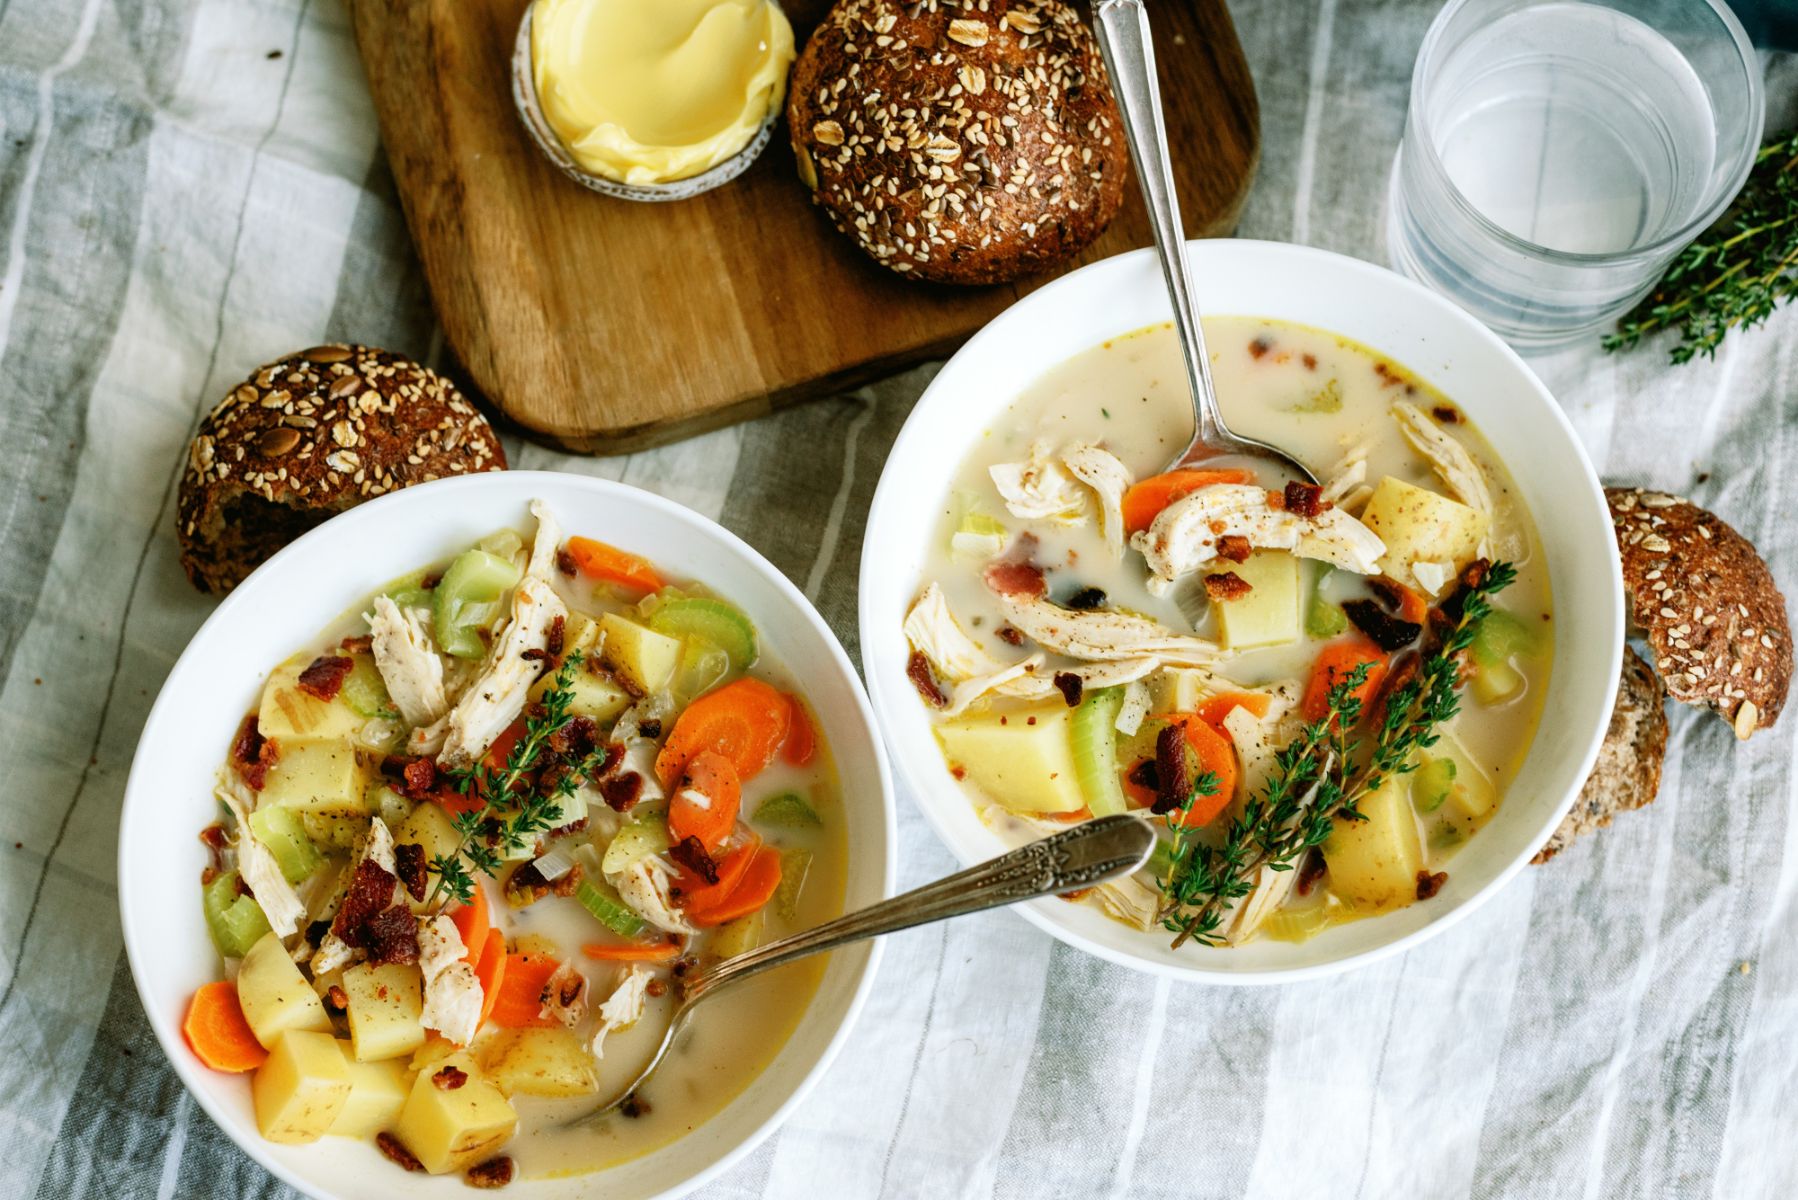 2 bowls of Creamy Chicken and Potato Soup with rolls